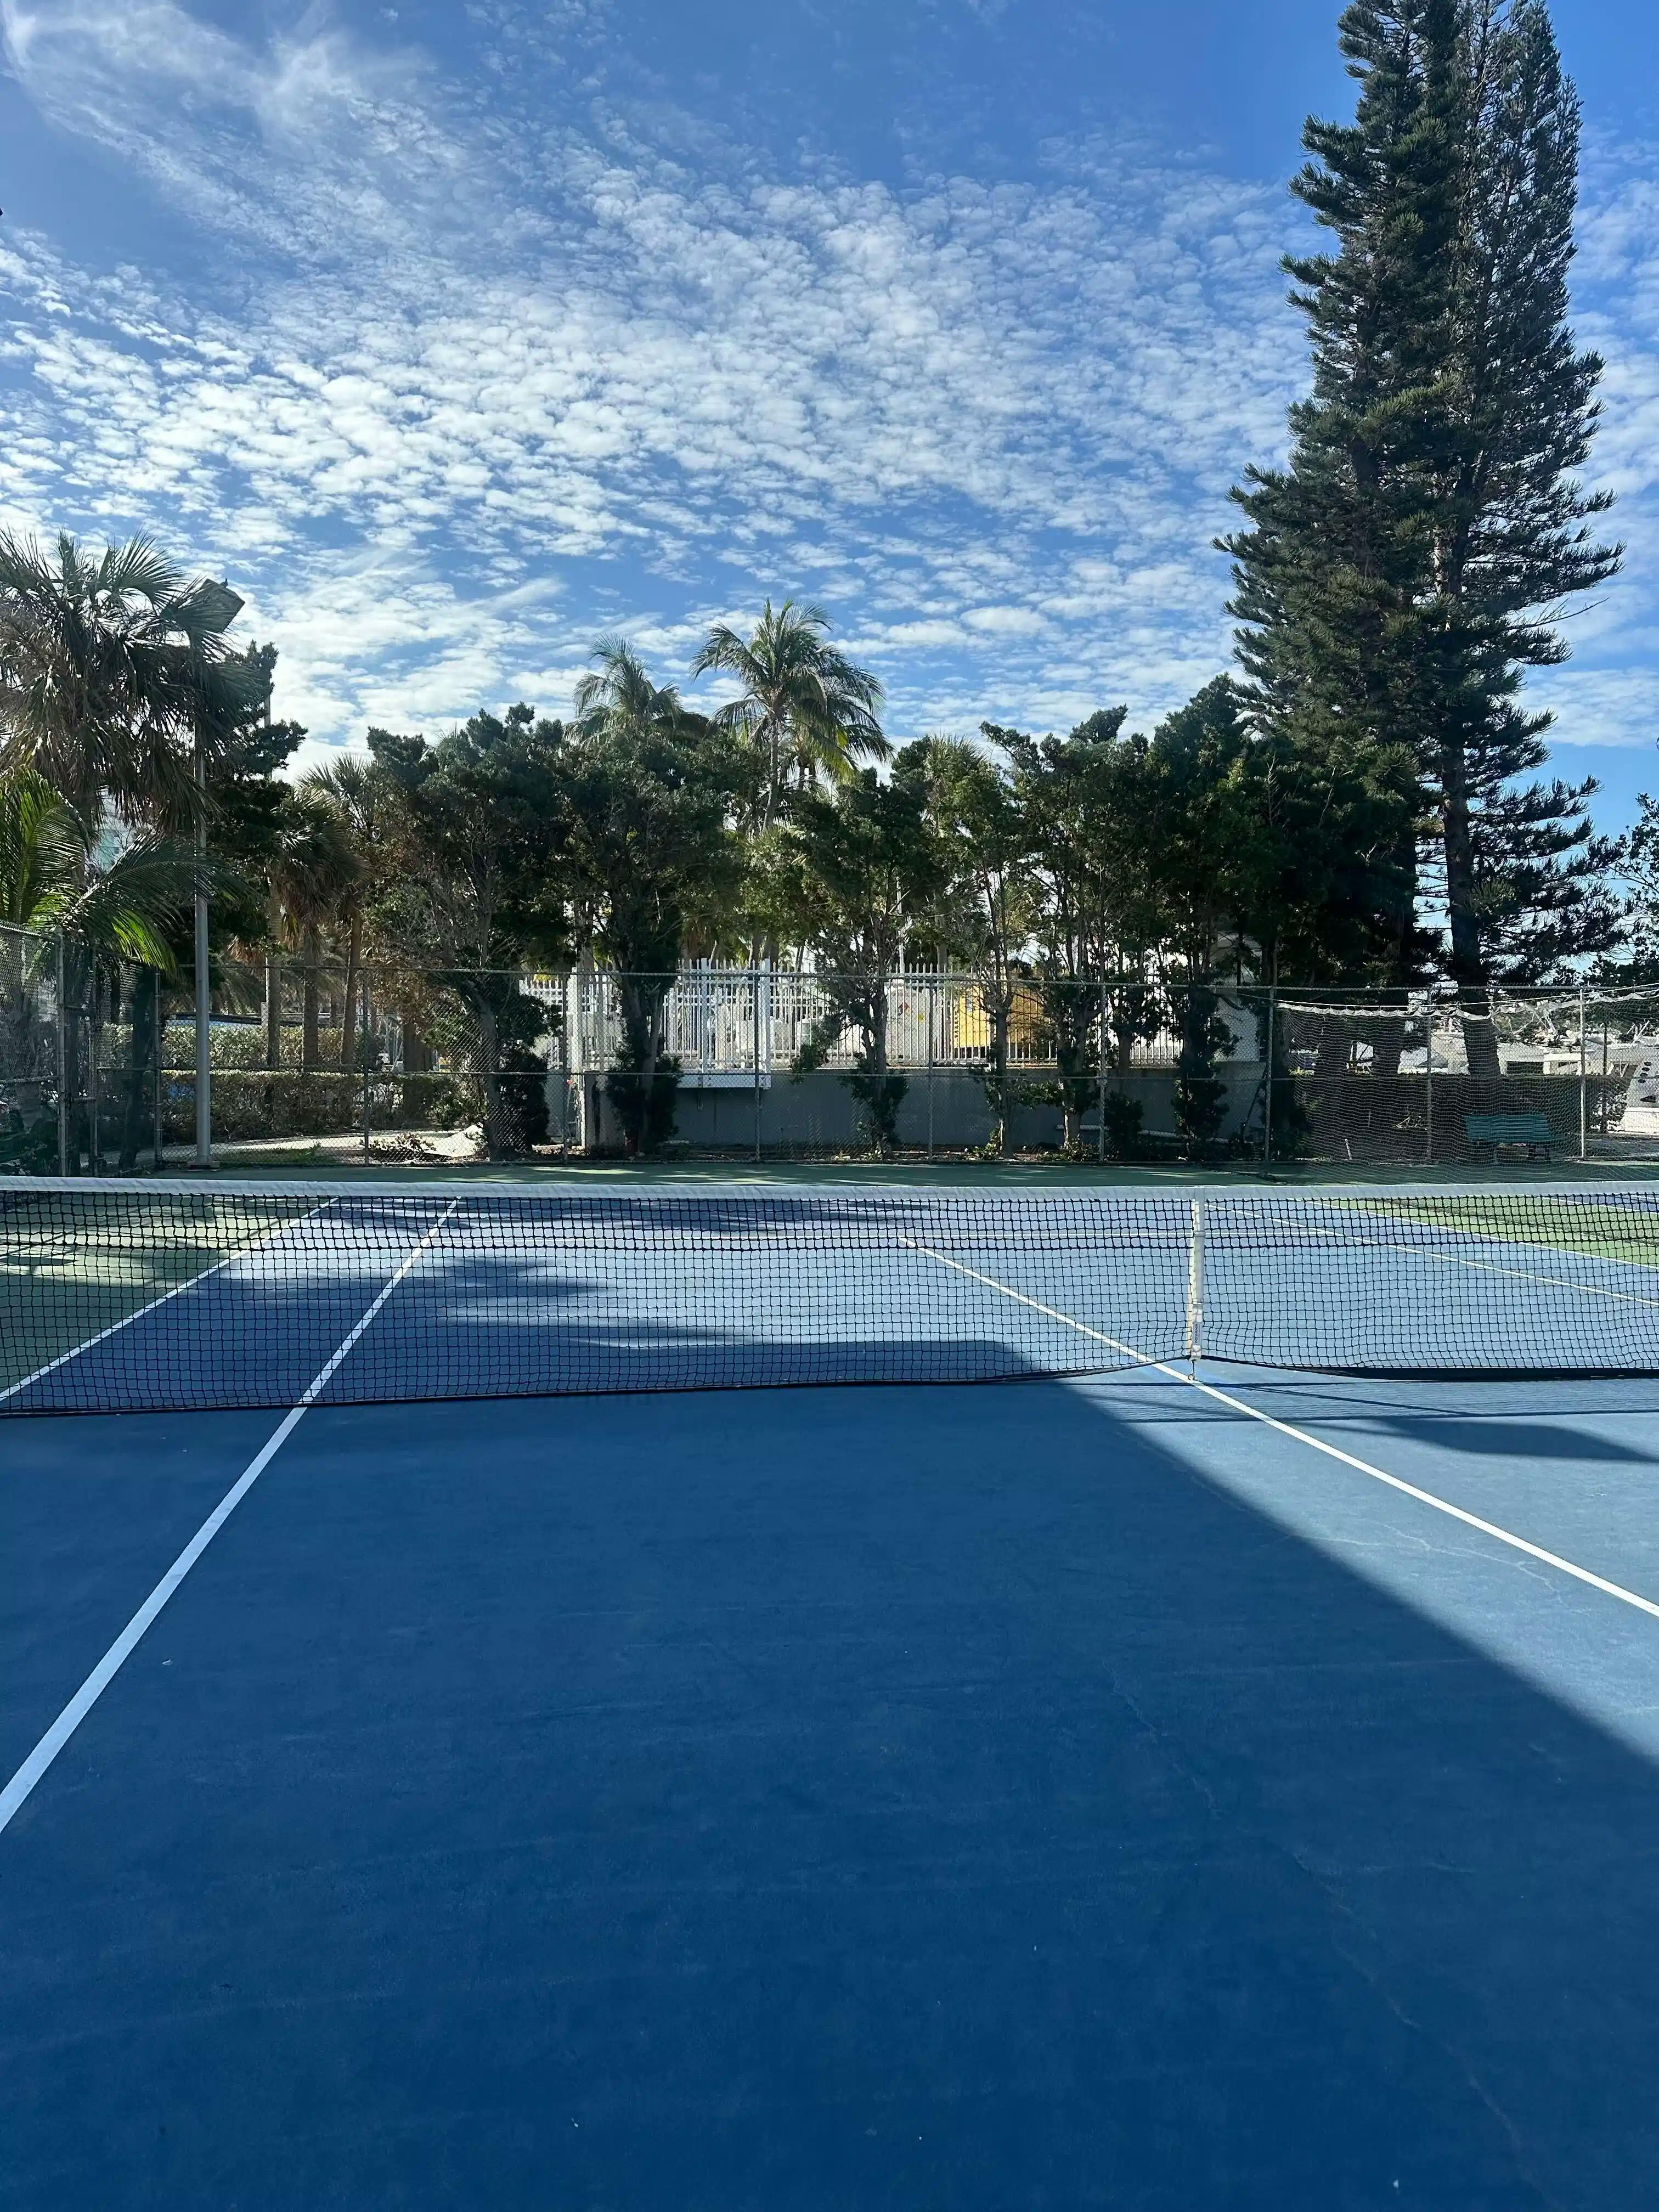 Image 1 of 2 of Anthony Flanagan Memorial Recreation Park court